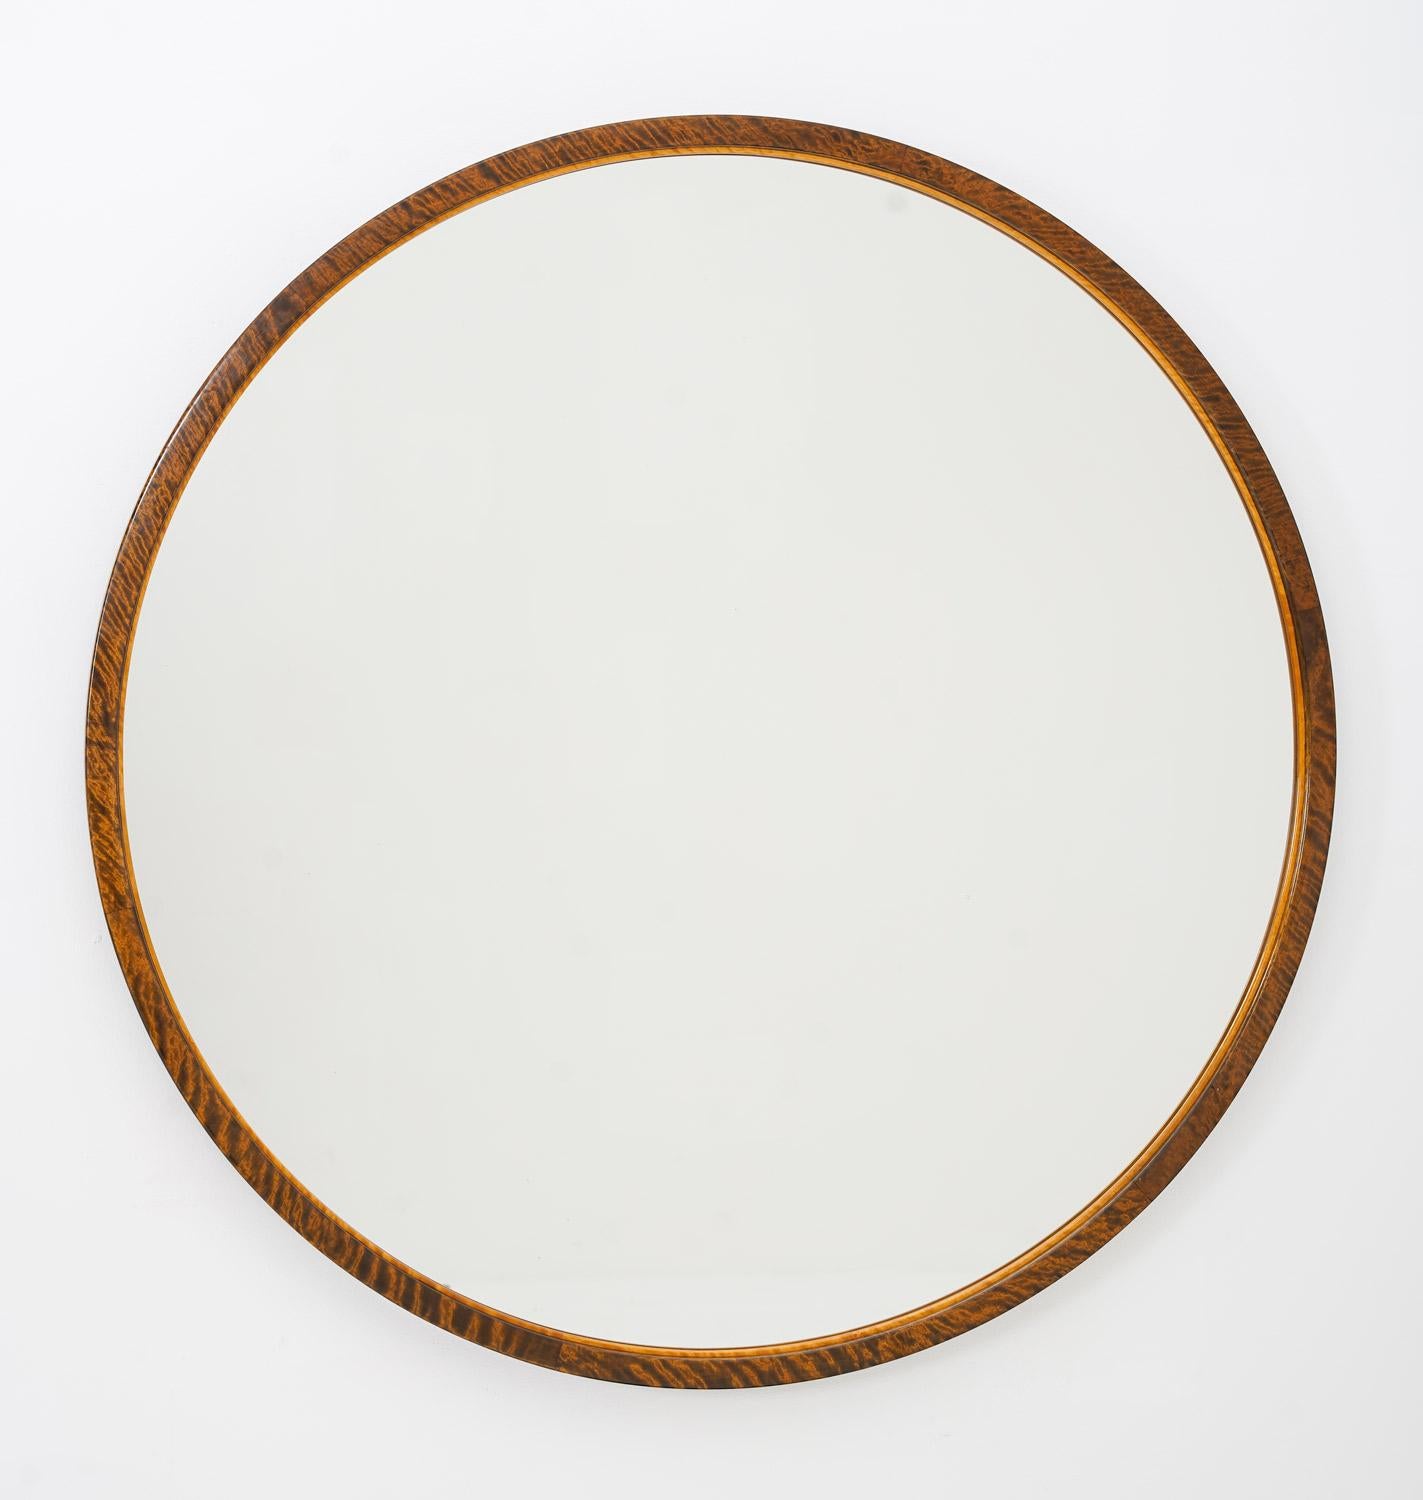 This rare mirror by Otto Schulz for Boet is a stunning piece of art that dates back to the 1930s, hailing from Sweden. This mirror boasts an impressively large size, and its round frame is made of high-quality birch wood, adorned with intricate